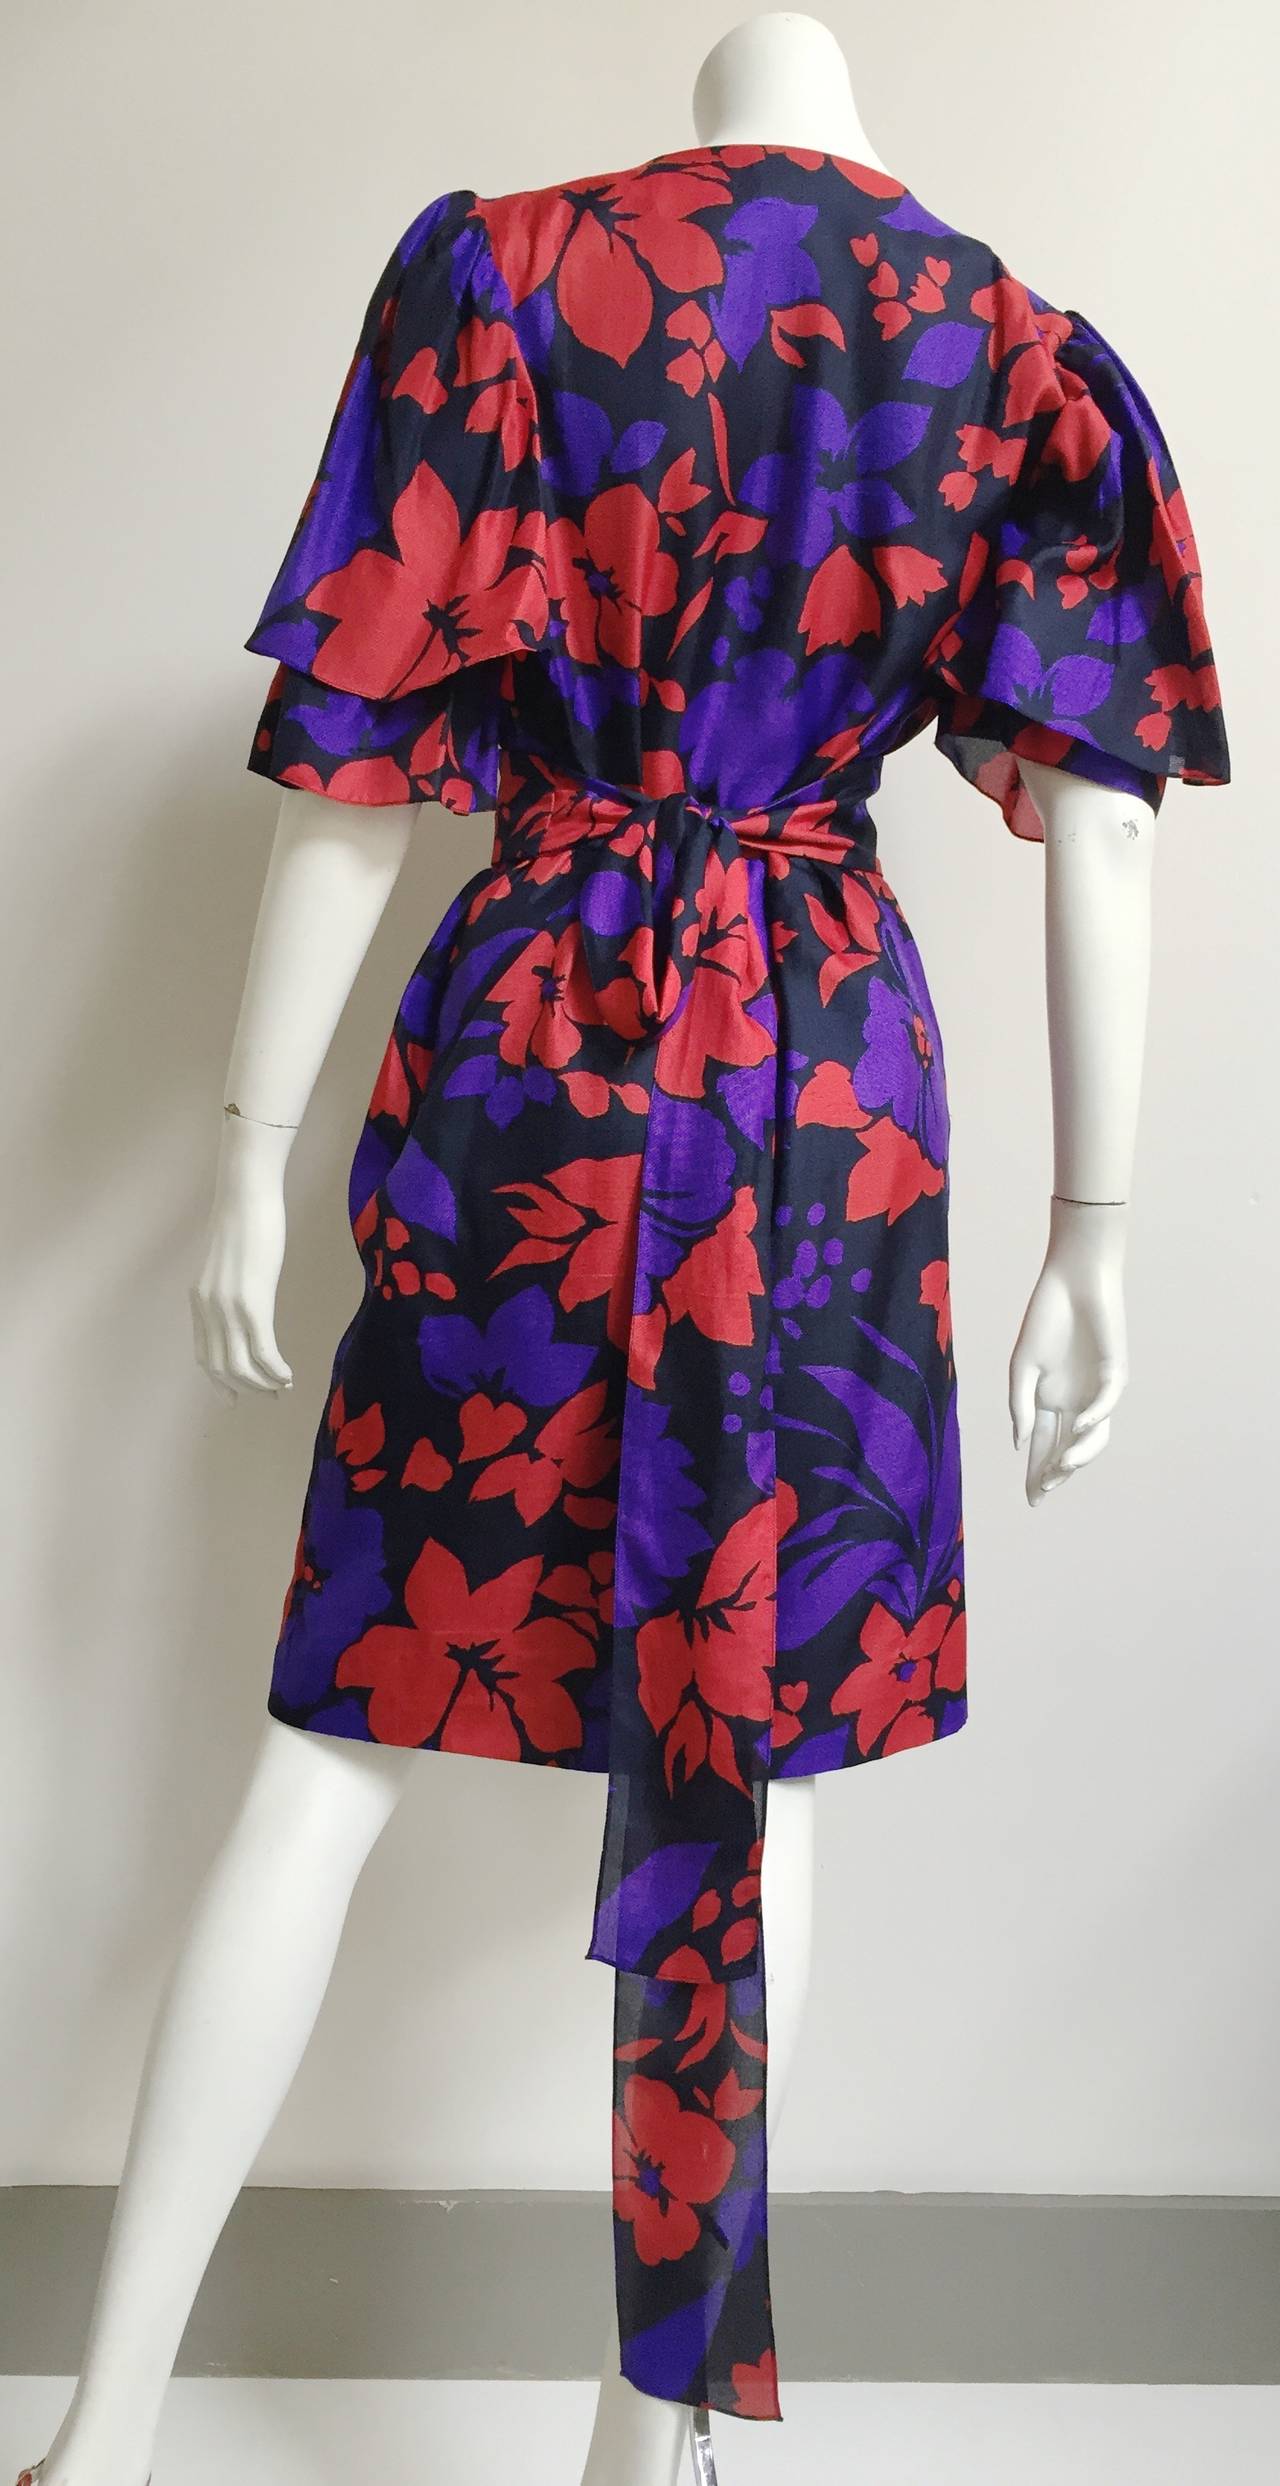 Givenchy 80s flower dress with sash belt size 12. 2